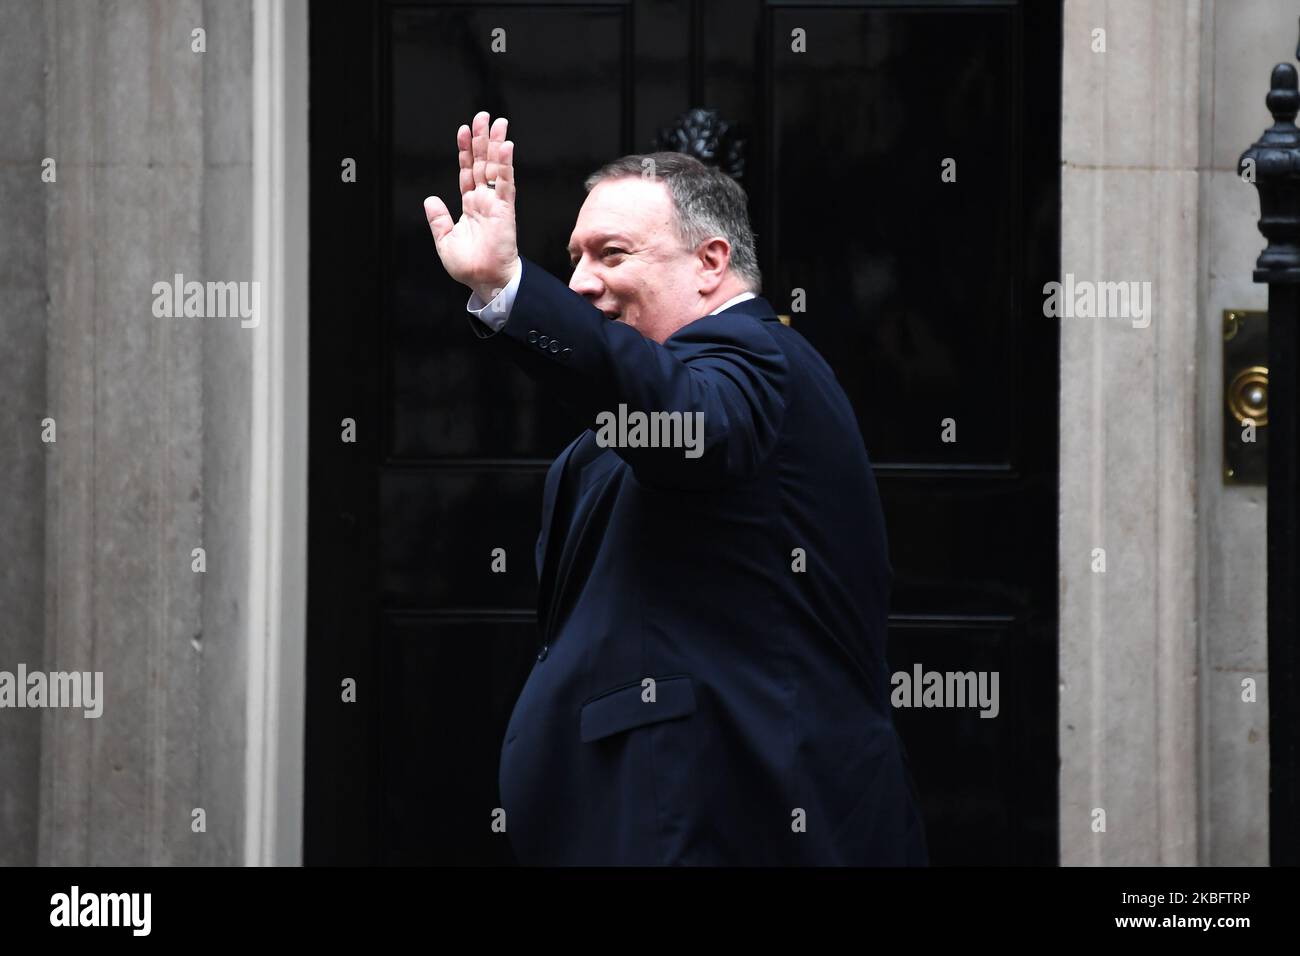 US Secretary of State Mike Pompeo arrives ahead of a meeting with British Prime Minister Boris Johnson at 10 Downing Street in London on January 30, 2020. (Photo by Alberto Pezzali/NurPhoto) Stock Photo